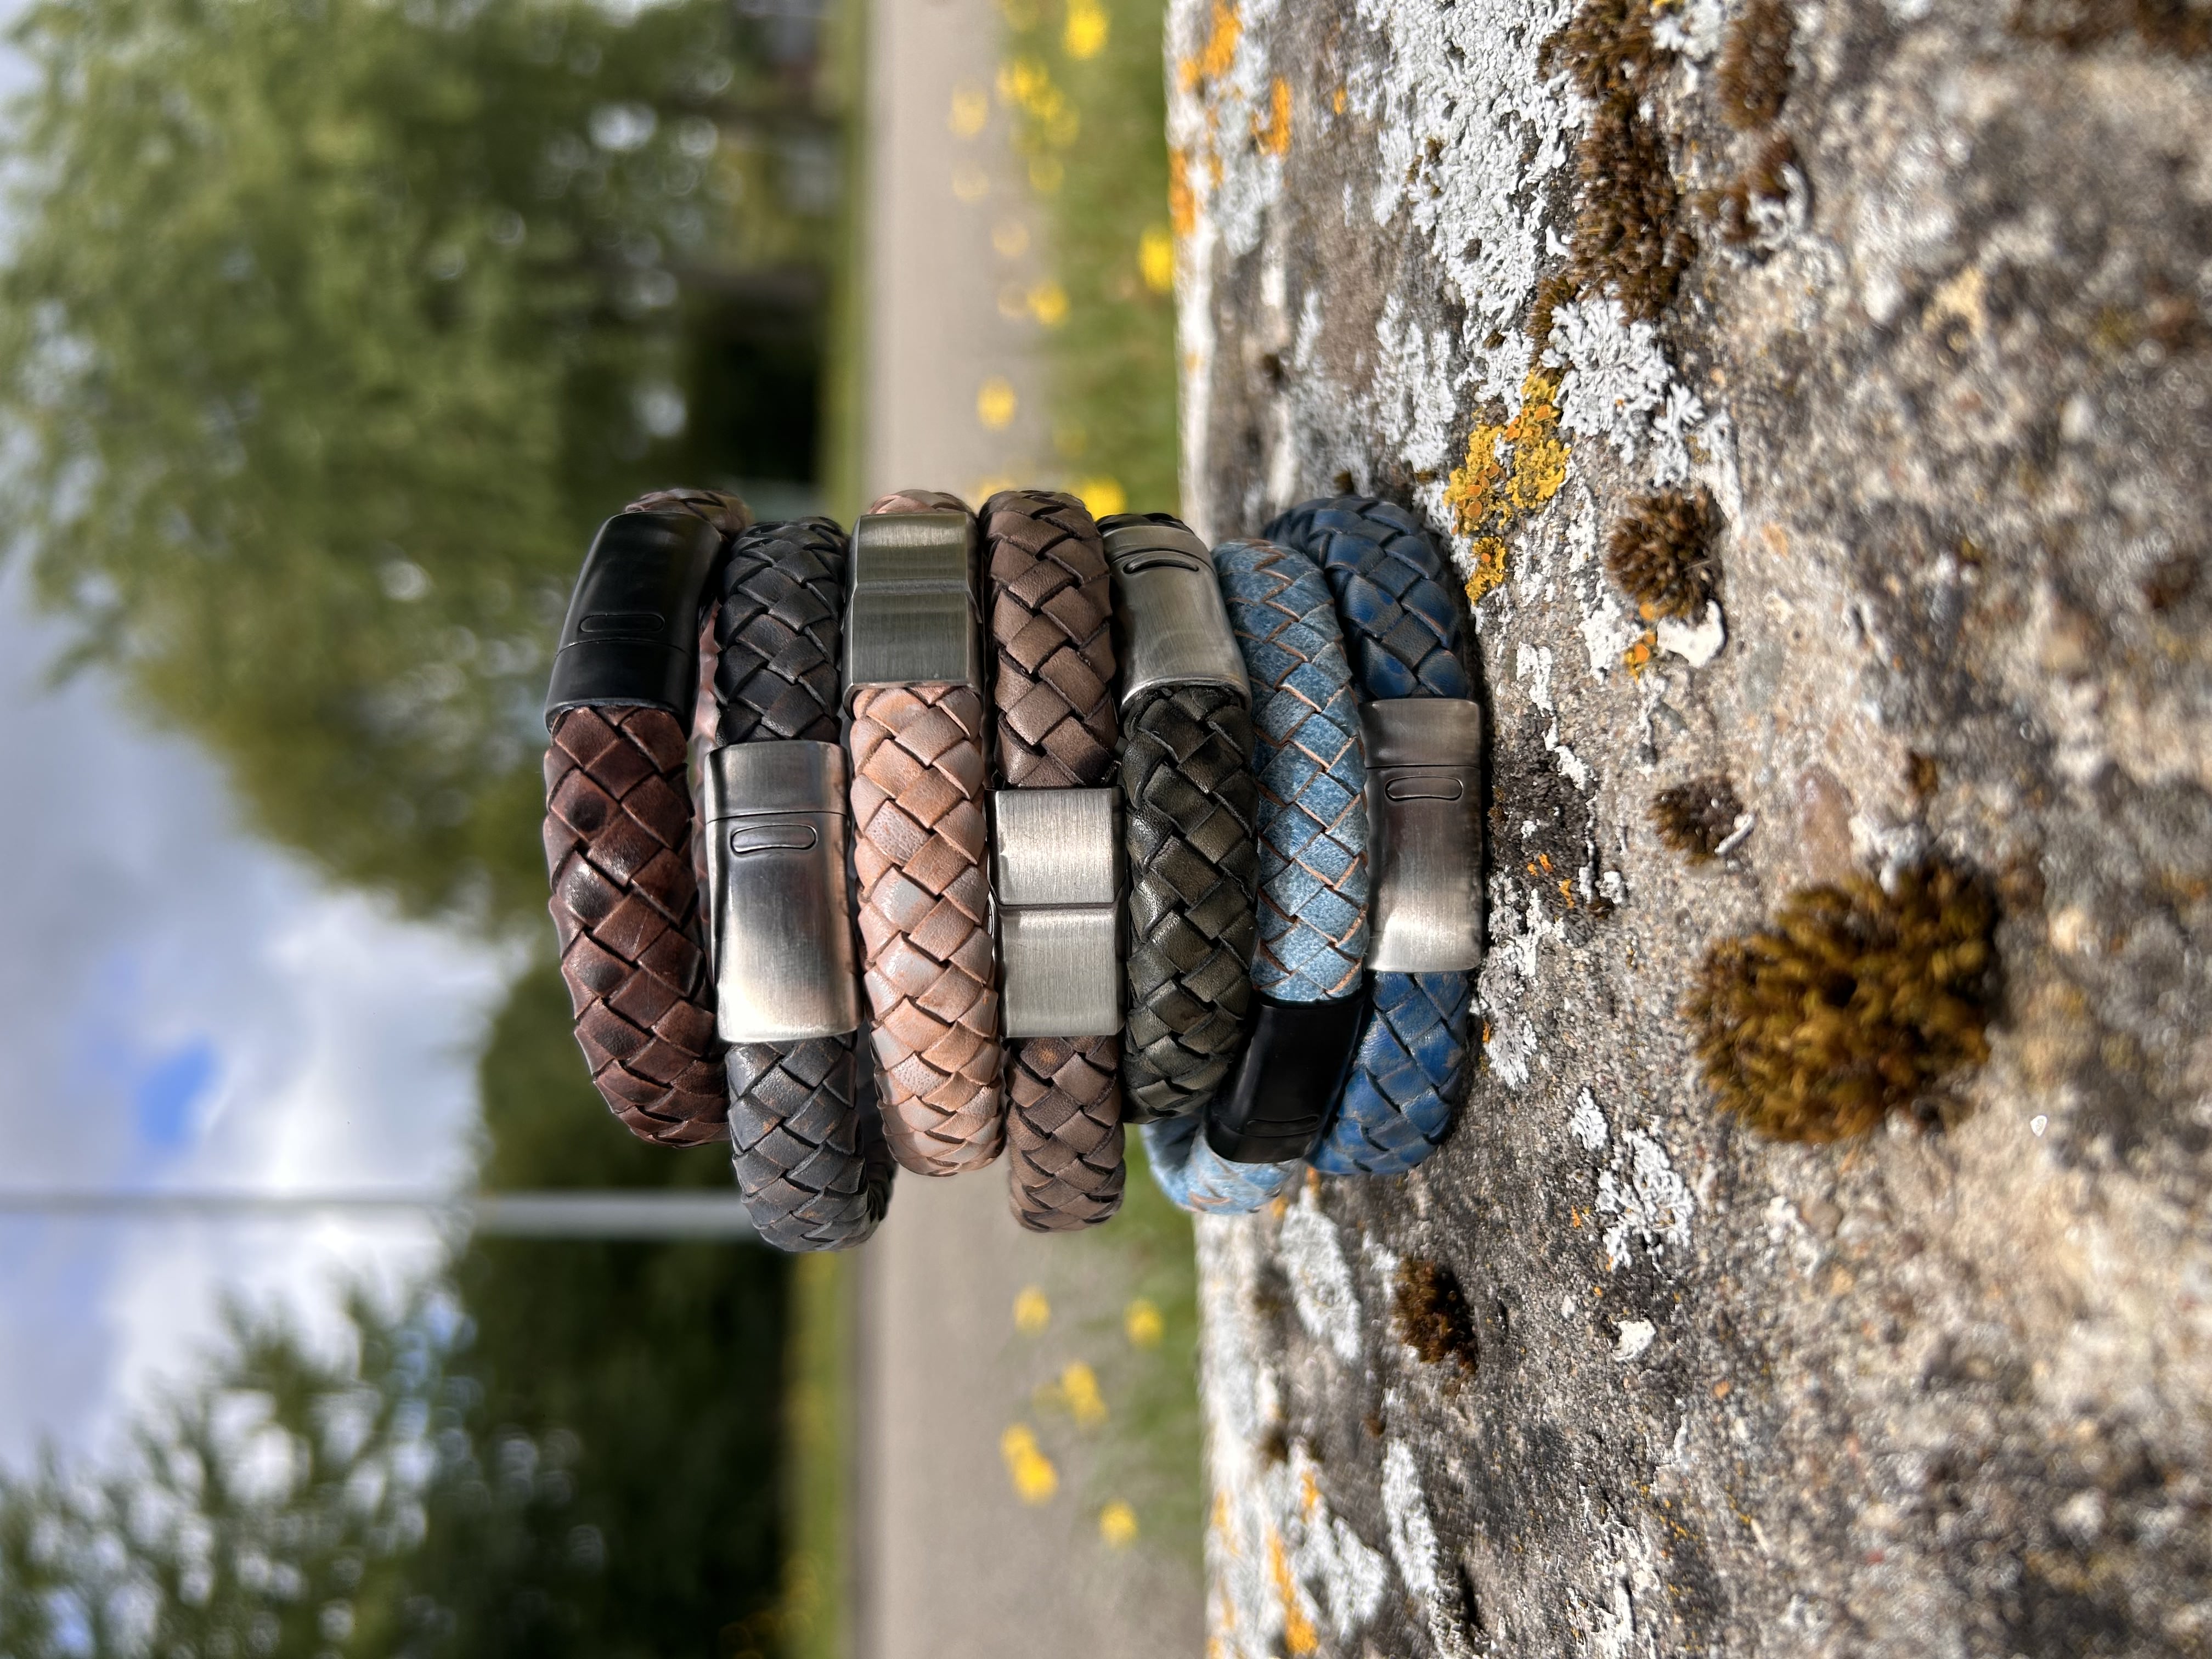 Mixing and Matching Cord Bracelets for Maximum Impact